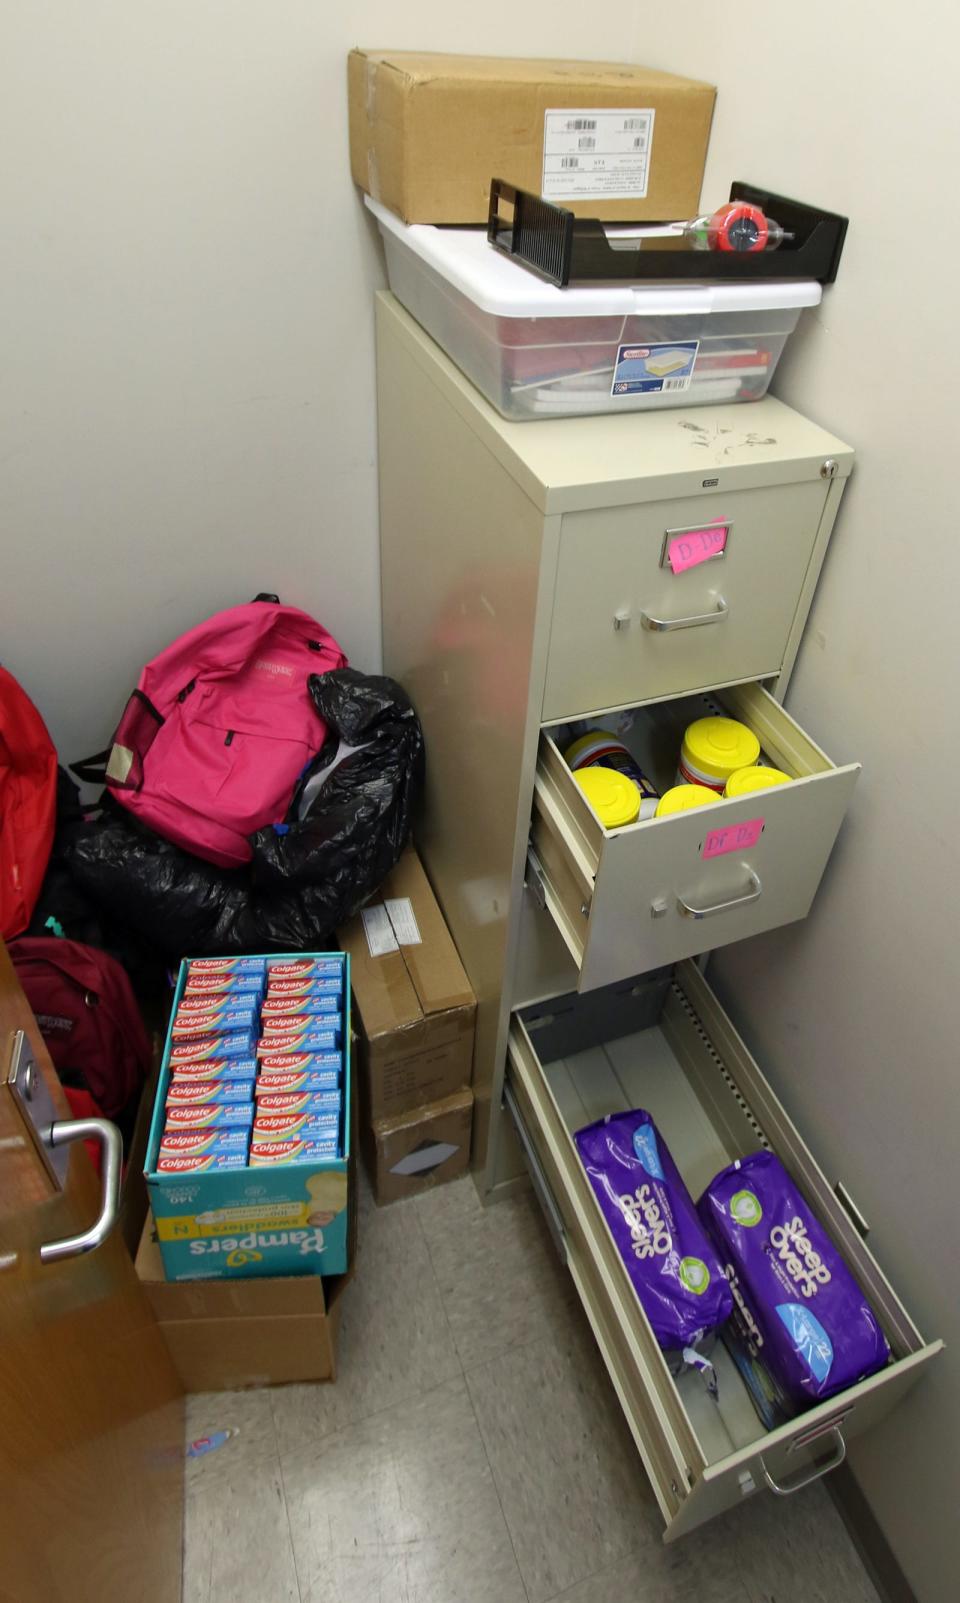 The supply closet with items for the essential needs thrift store for Haitian refugees at the Gaston County Department of Social Services.